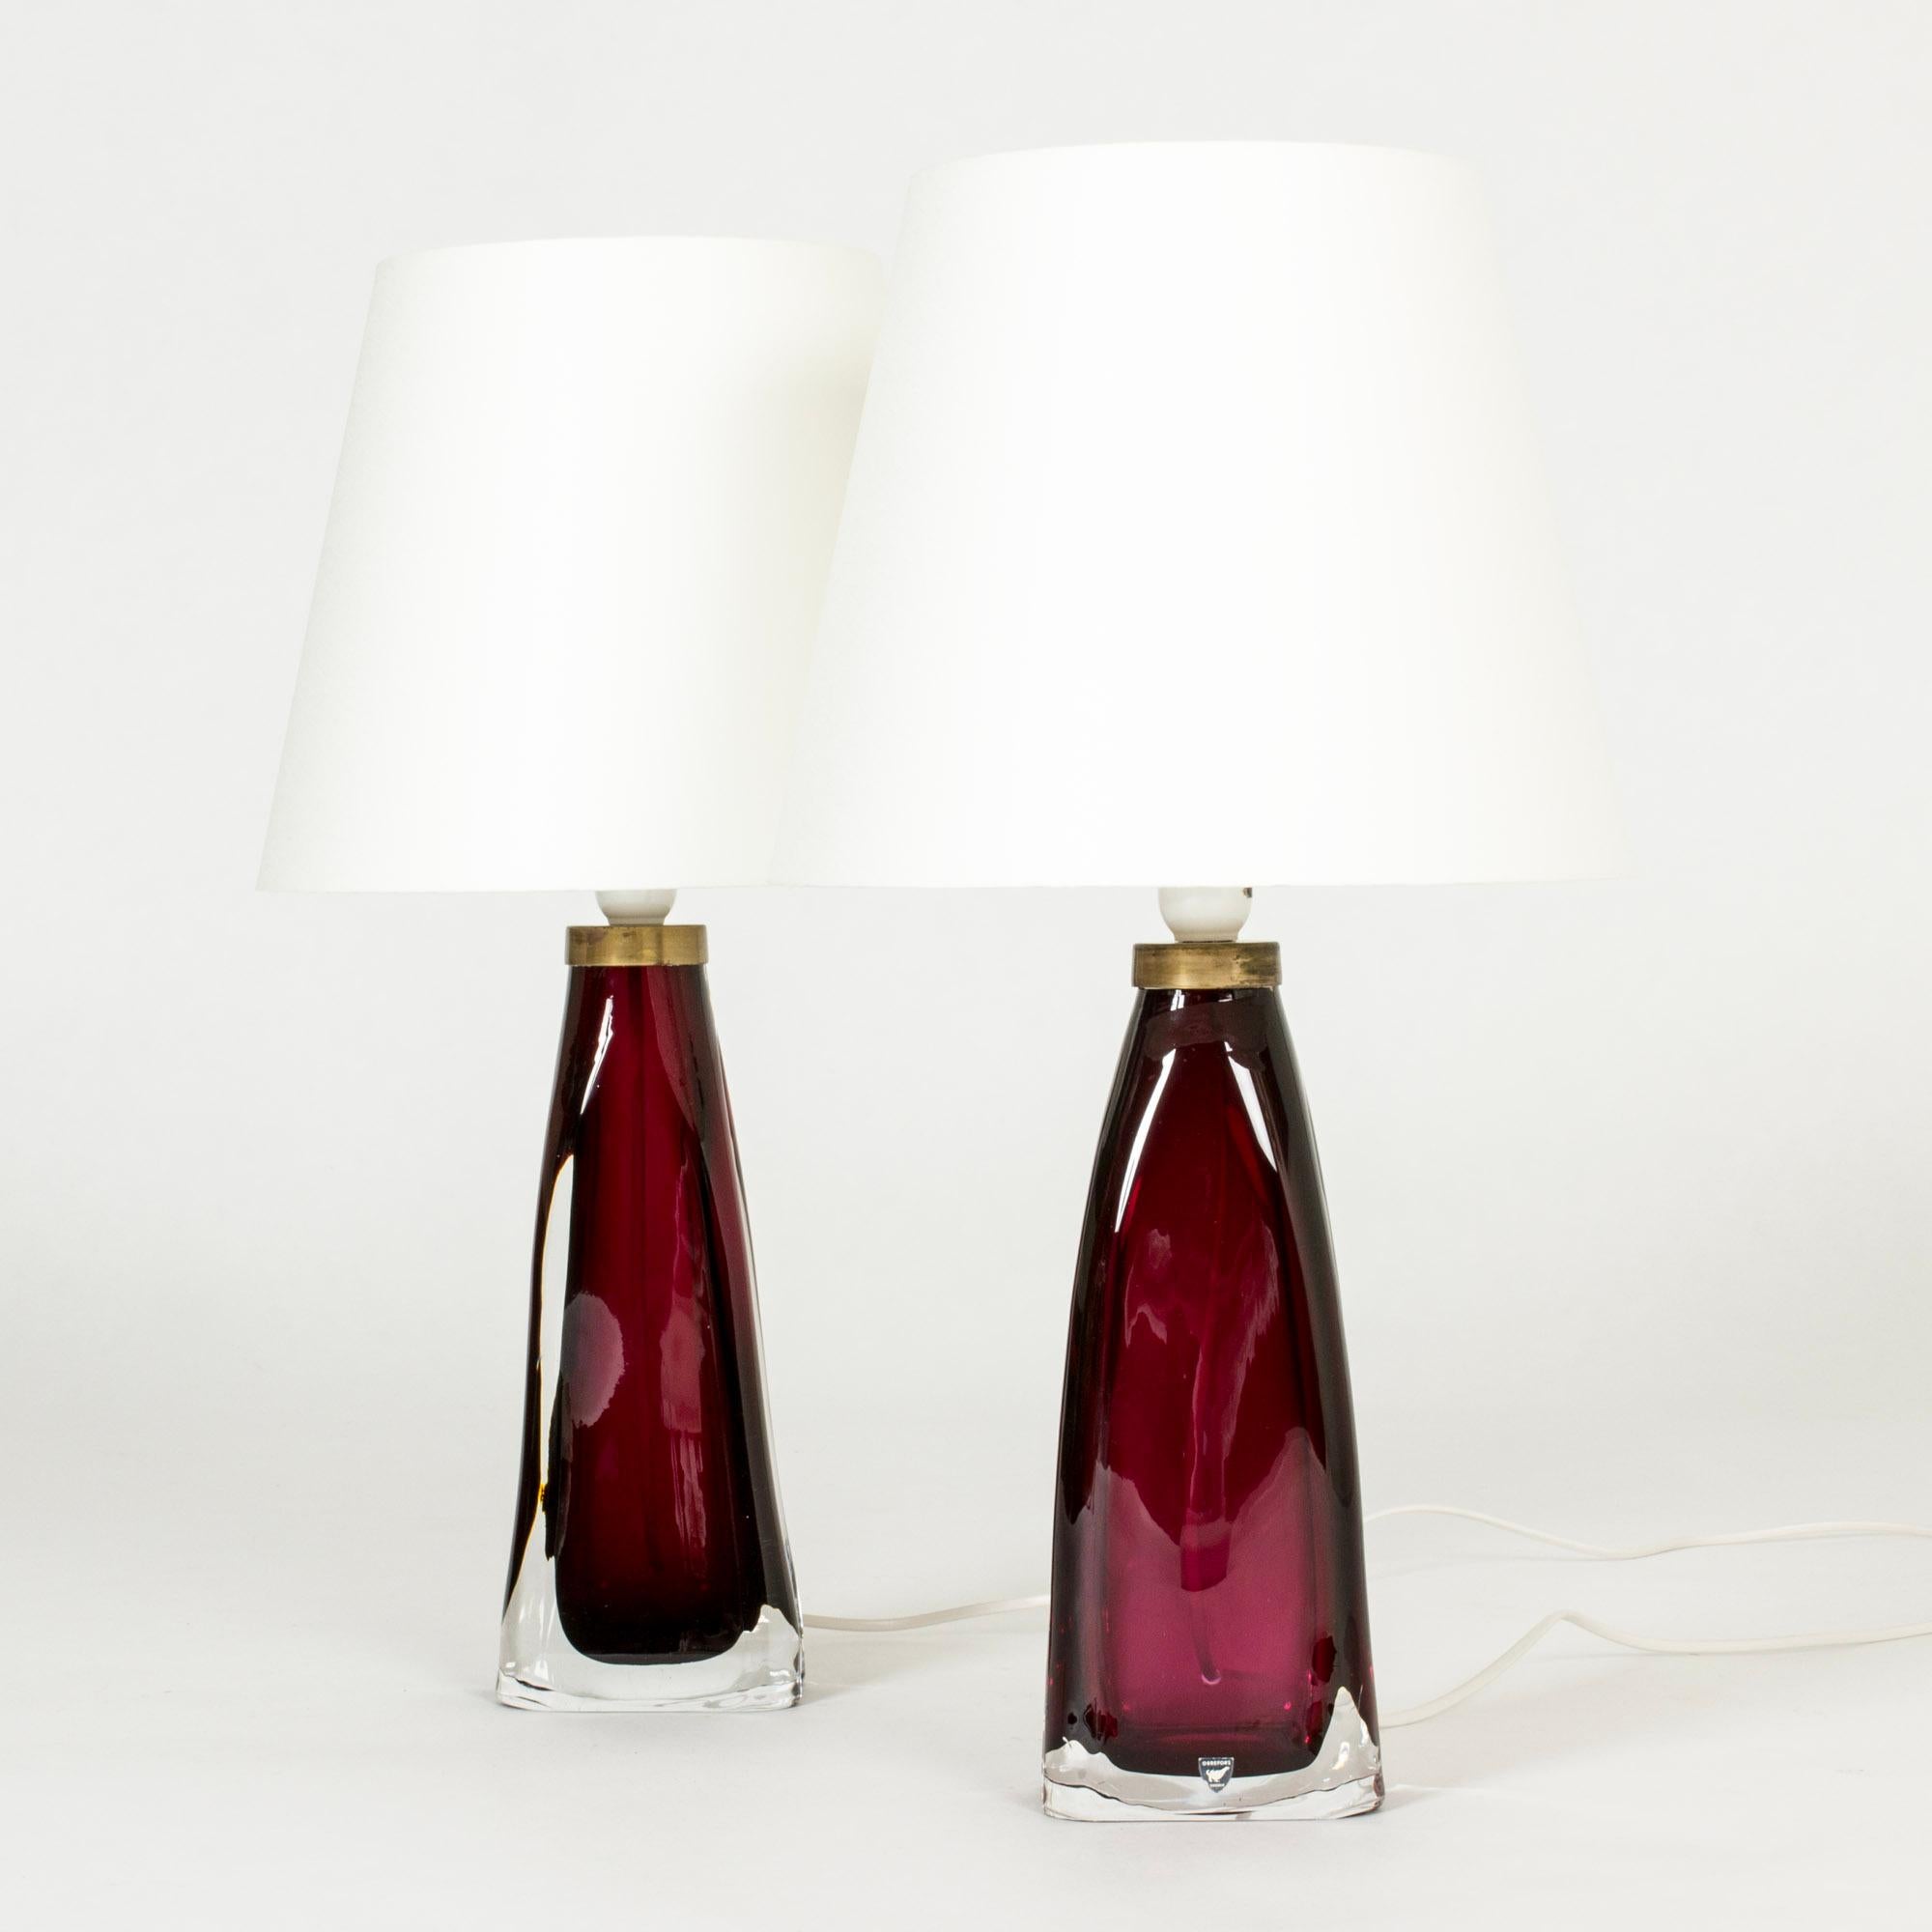 Pair of raspberry red glass table lamps by Carl Fagerlund for Orrefors. Heavy glass bases with a somewhat undulating shape and brass detail at the top. Very elegant with movement in the design.